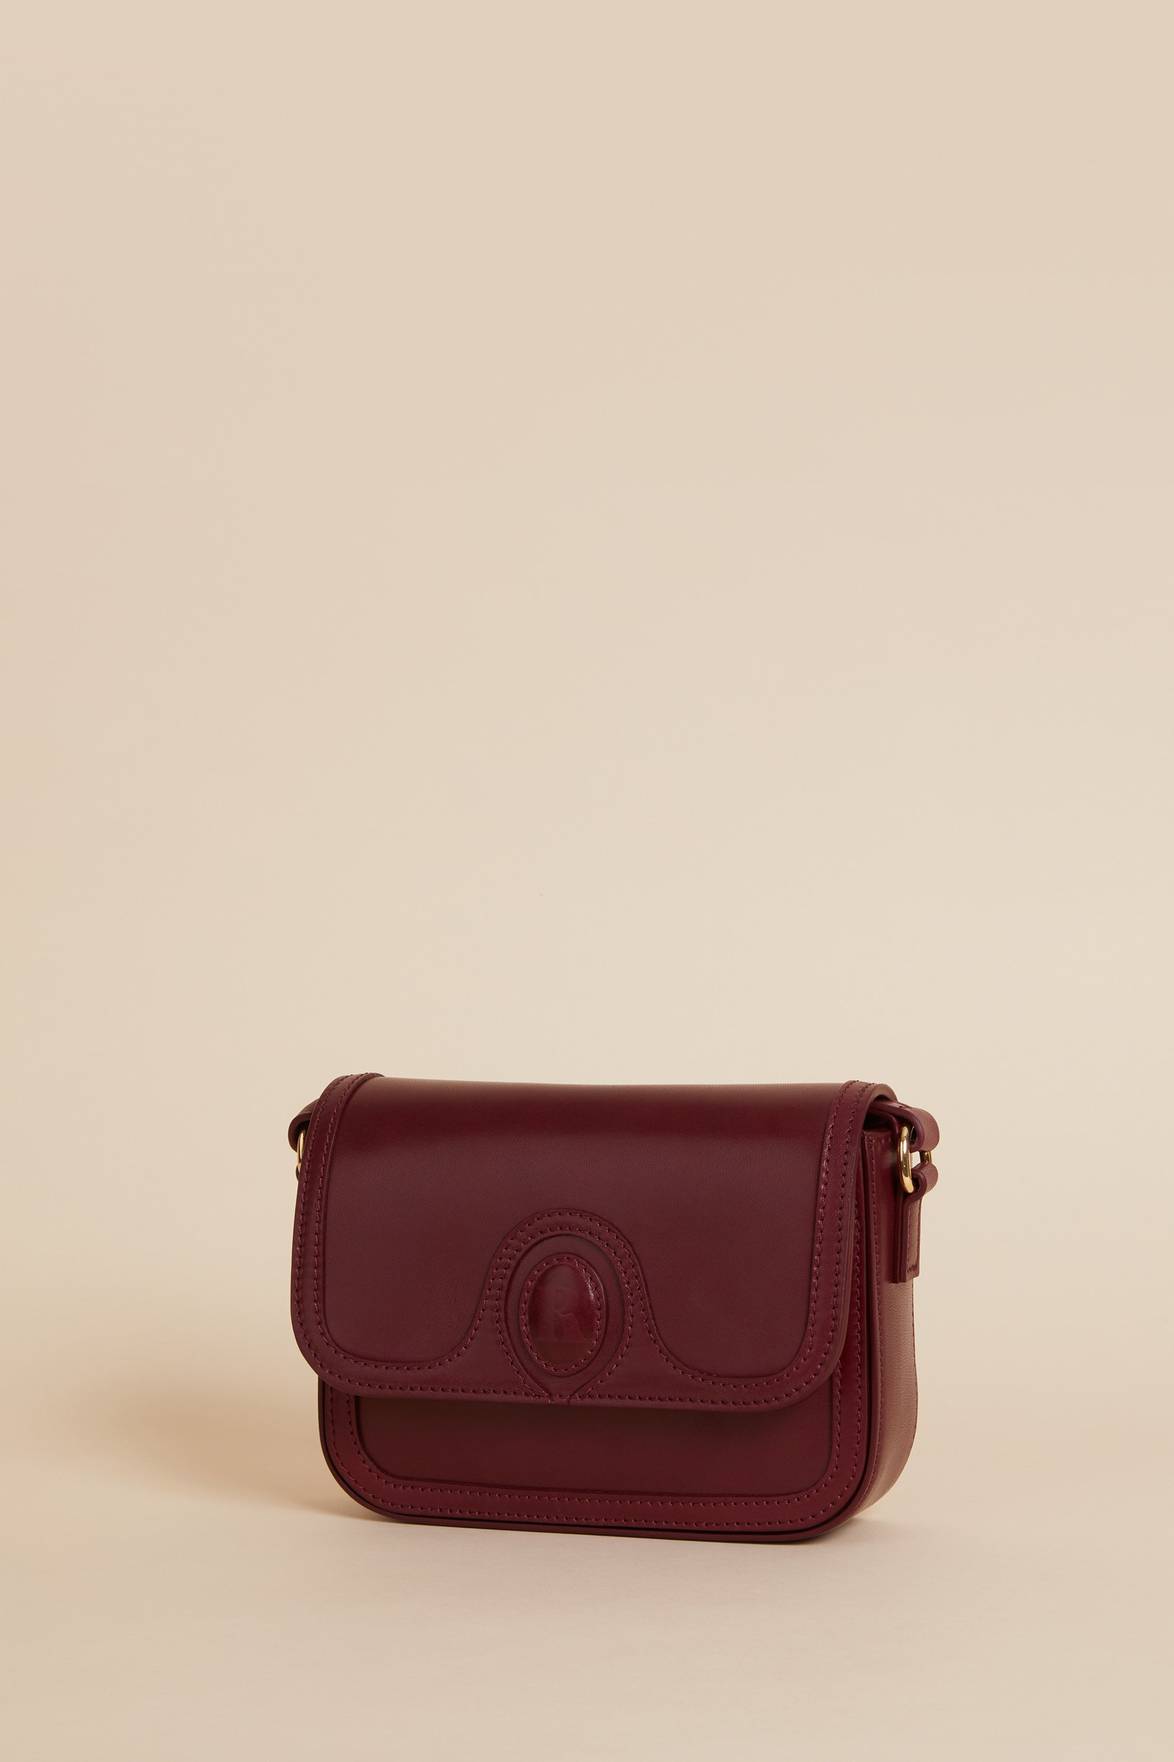 The Sac a main Bibi Nappa is the perfect accessory for any outfit. Made from 100% smooth cow leather, this small bag features a stylish "R" embossed flap with a magnetic closure. With its sleek design and bold burgundy color, it's both functional and fashionable.